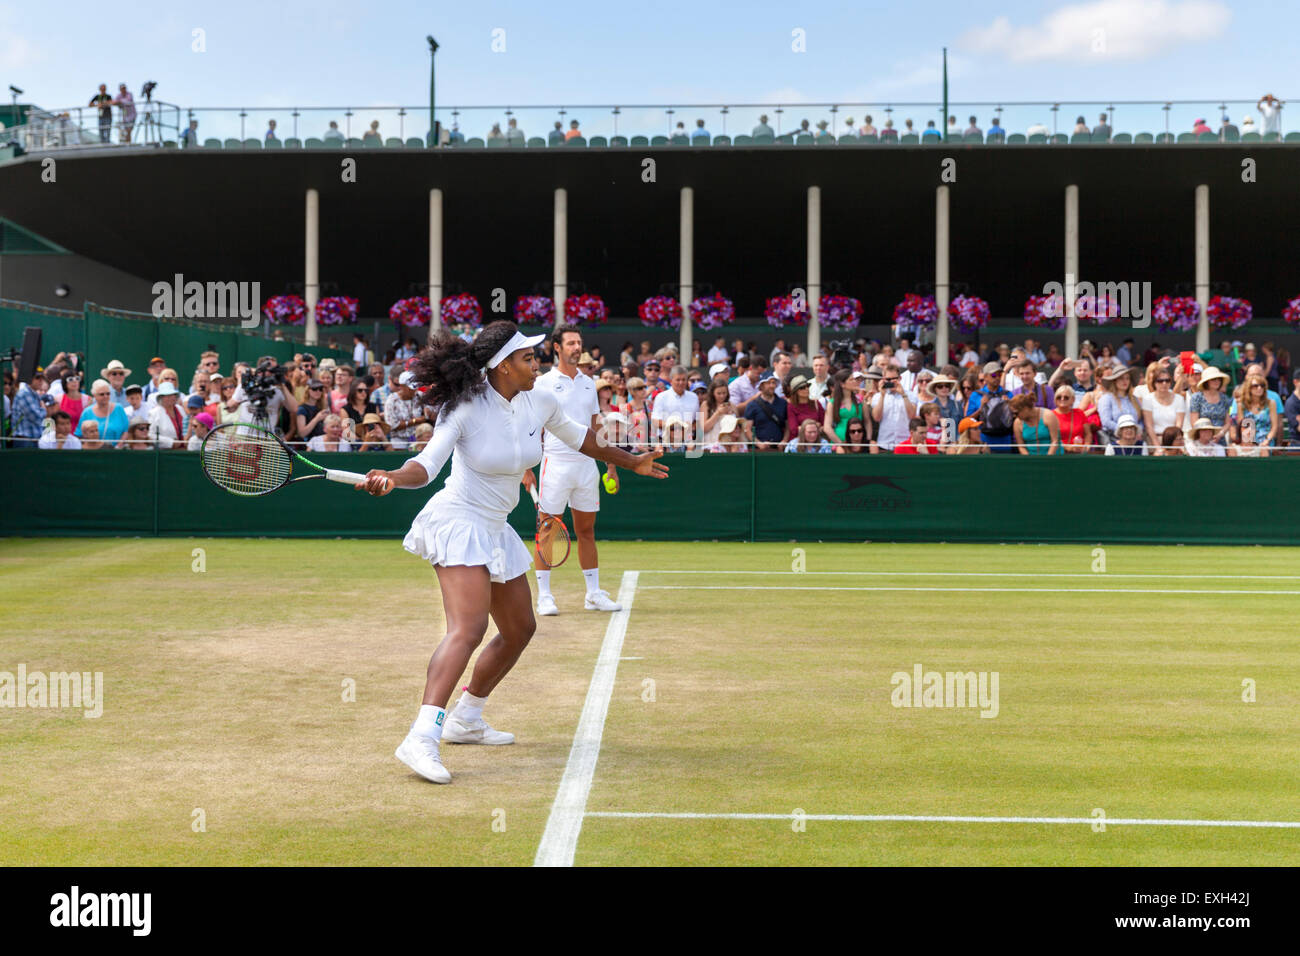 Serena Williams warms up for play on court No. 5, helped by coach Patrick Mouratoglou, during the Wimbledon Championships 2015 Stock Photo